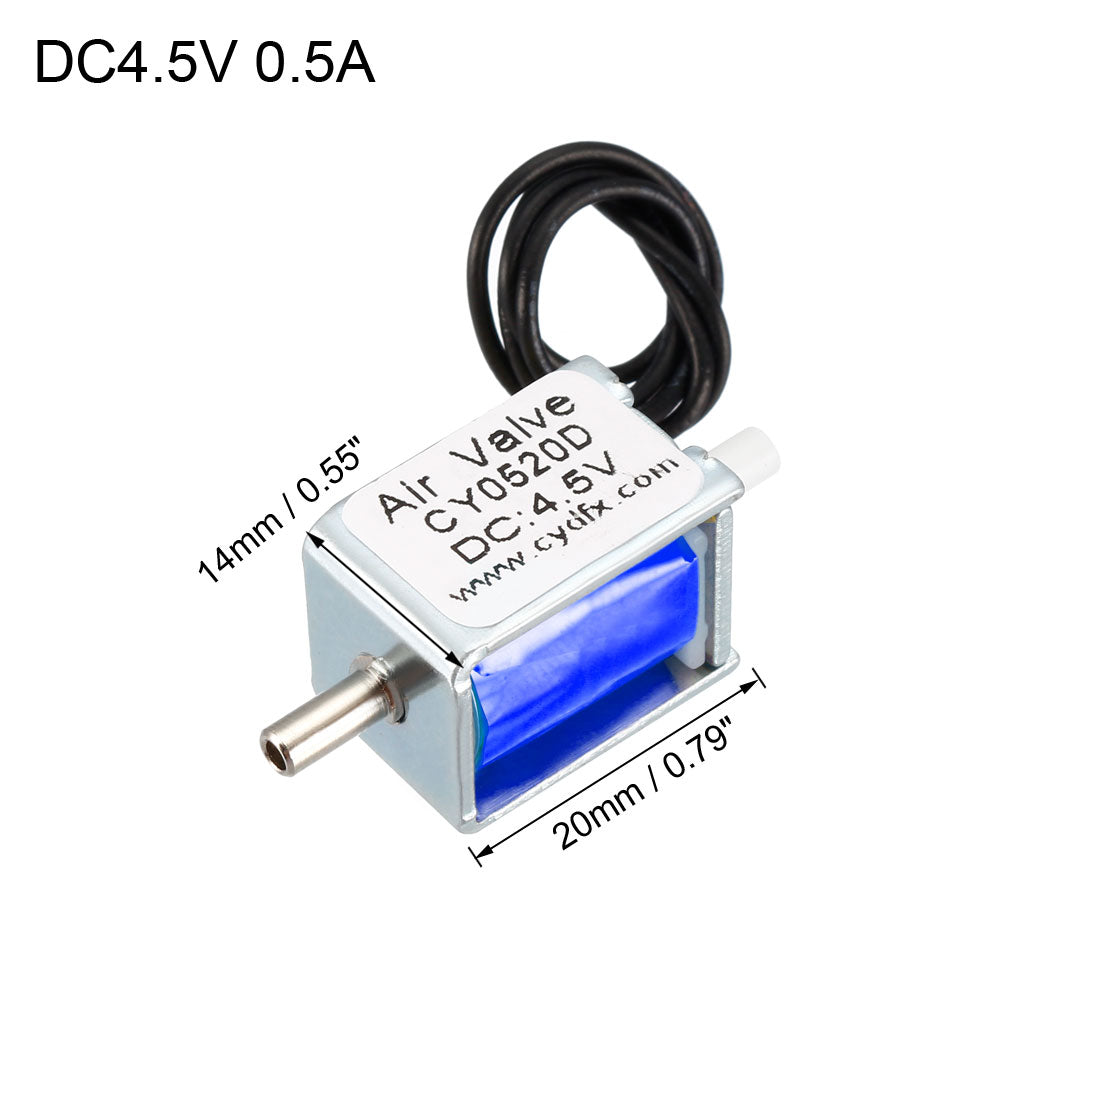 uxcell Uxcell Miniature Solenoid Valve 2 Way Normally Closed DC4.5V 0.5A Air Solenoid Valve